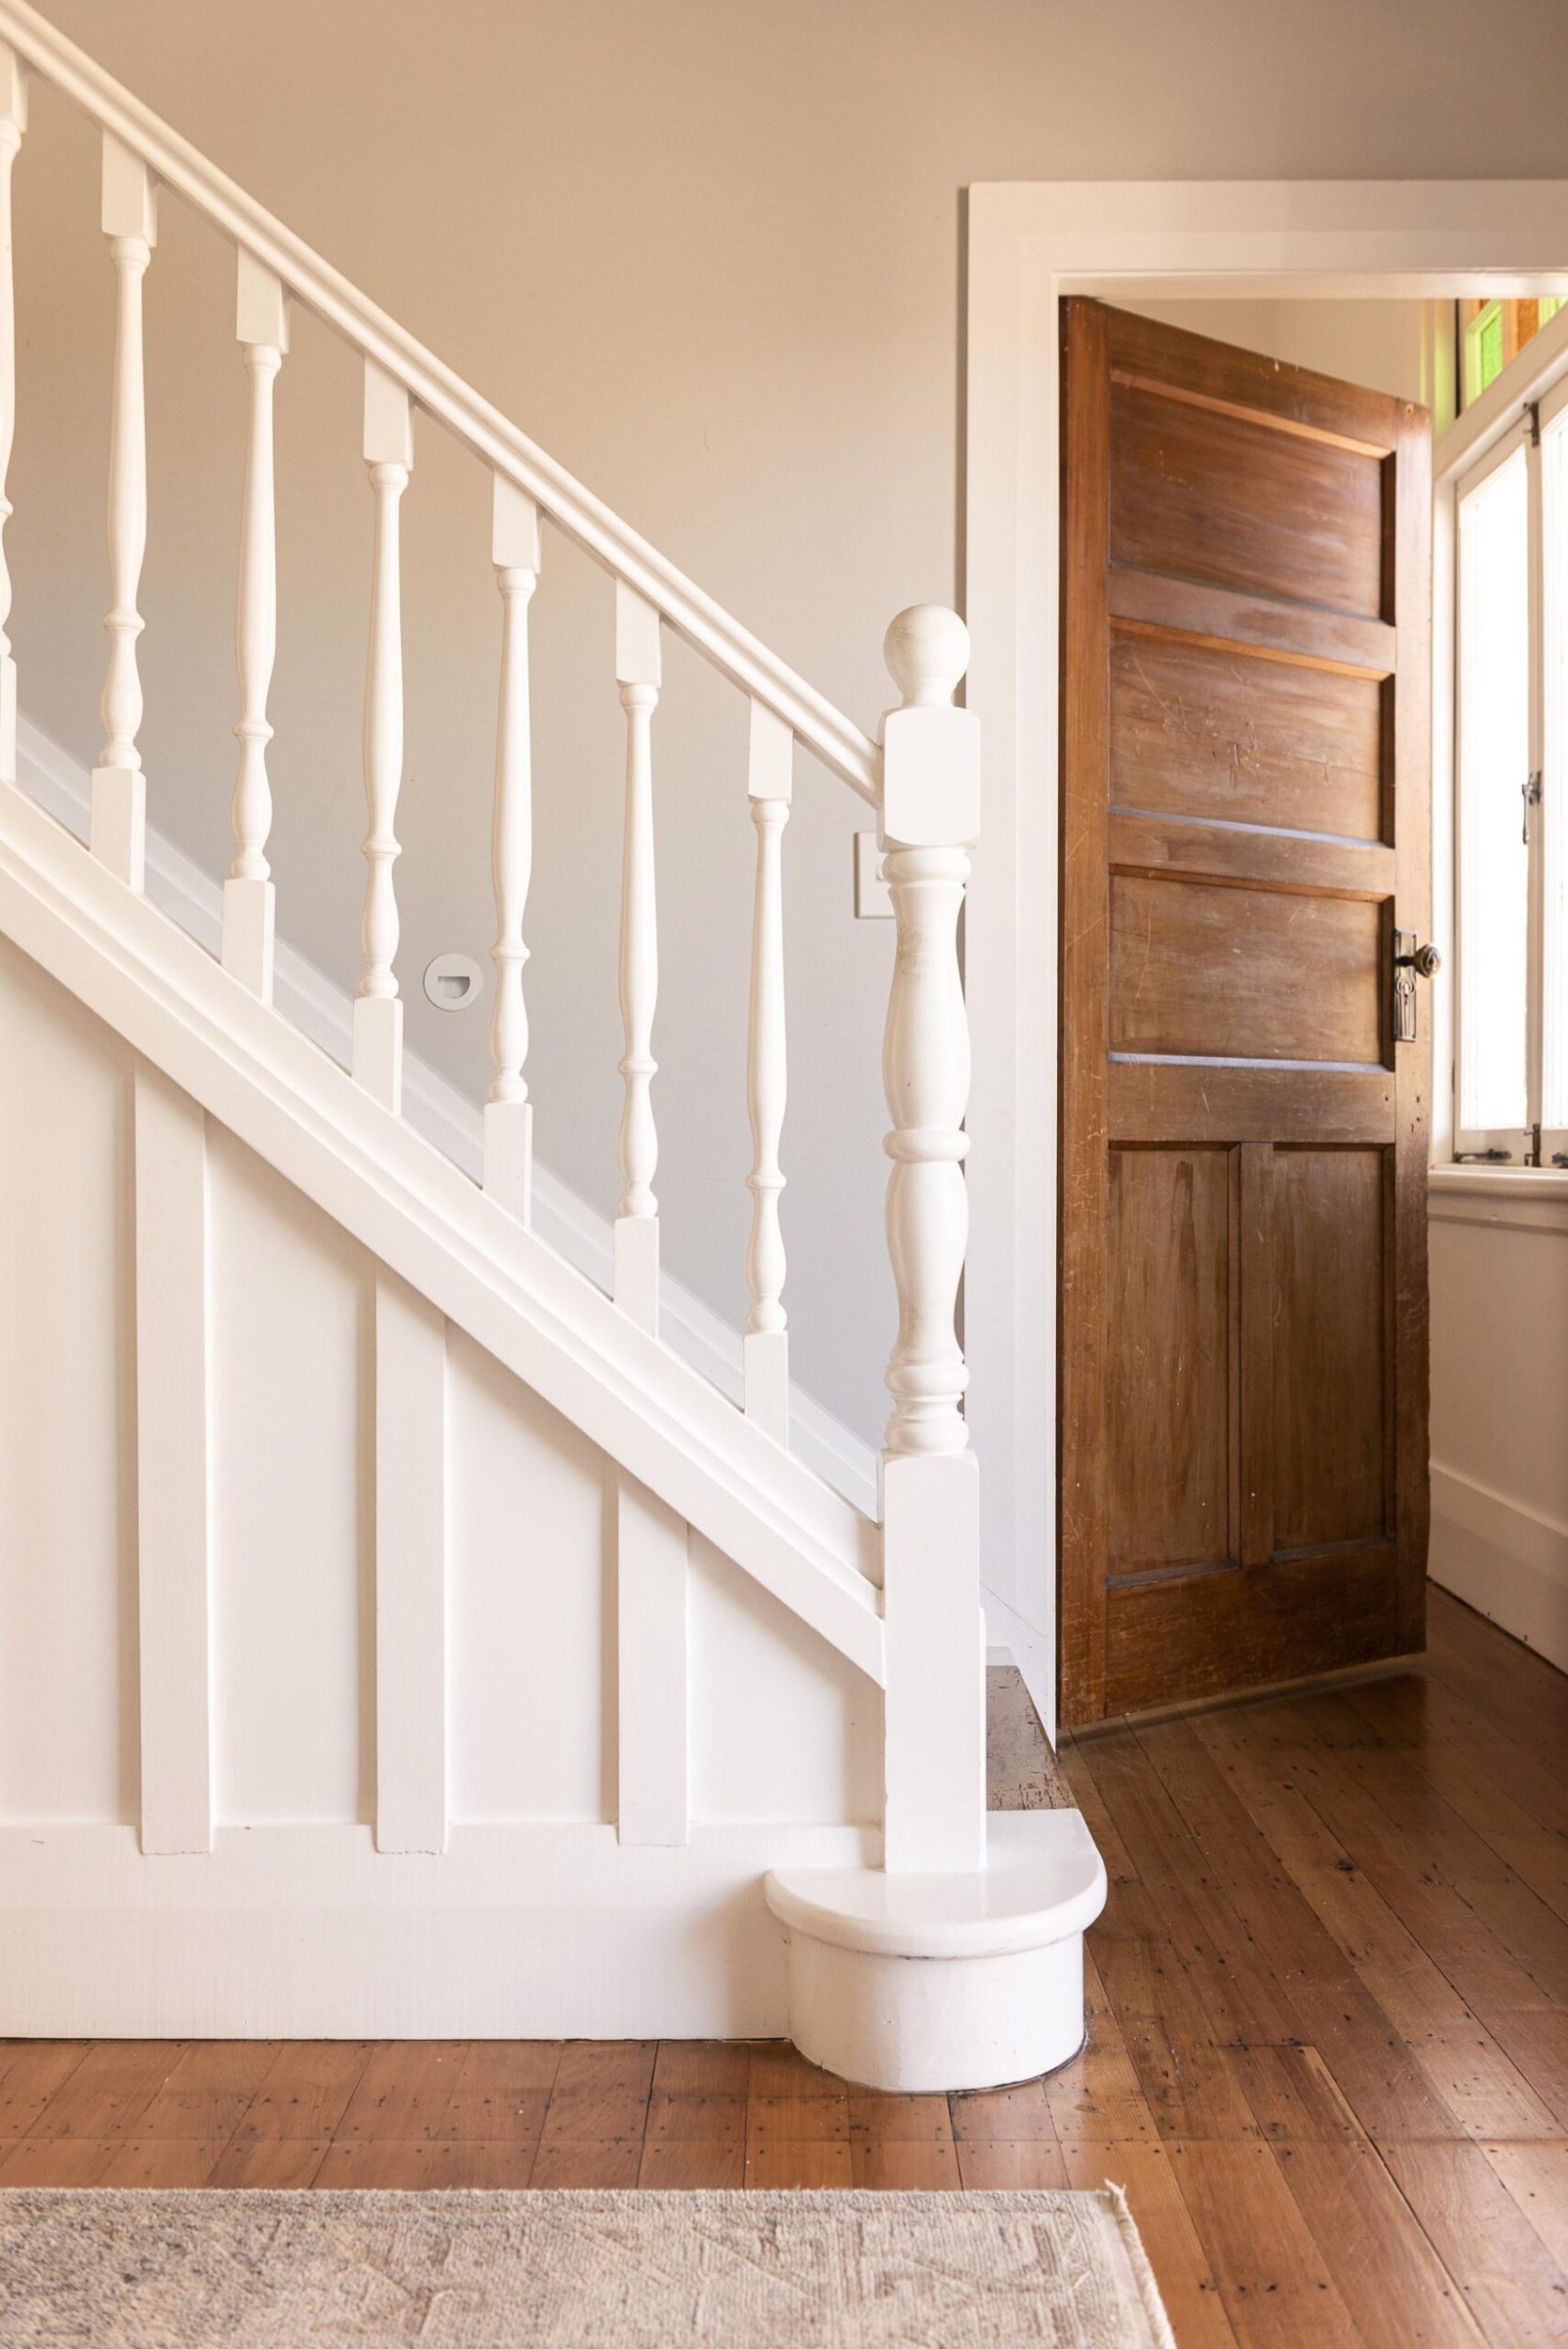 A white wood stairway in a home with polished wood floors